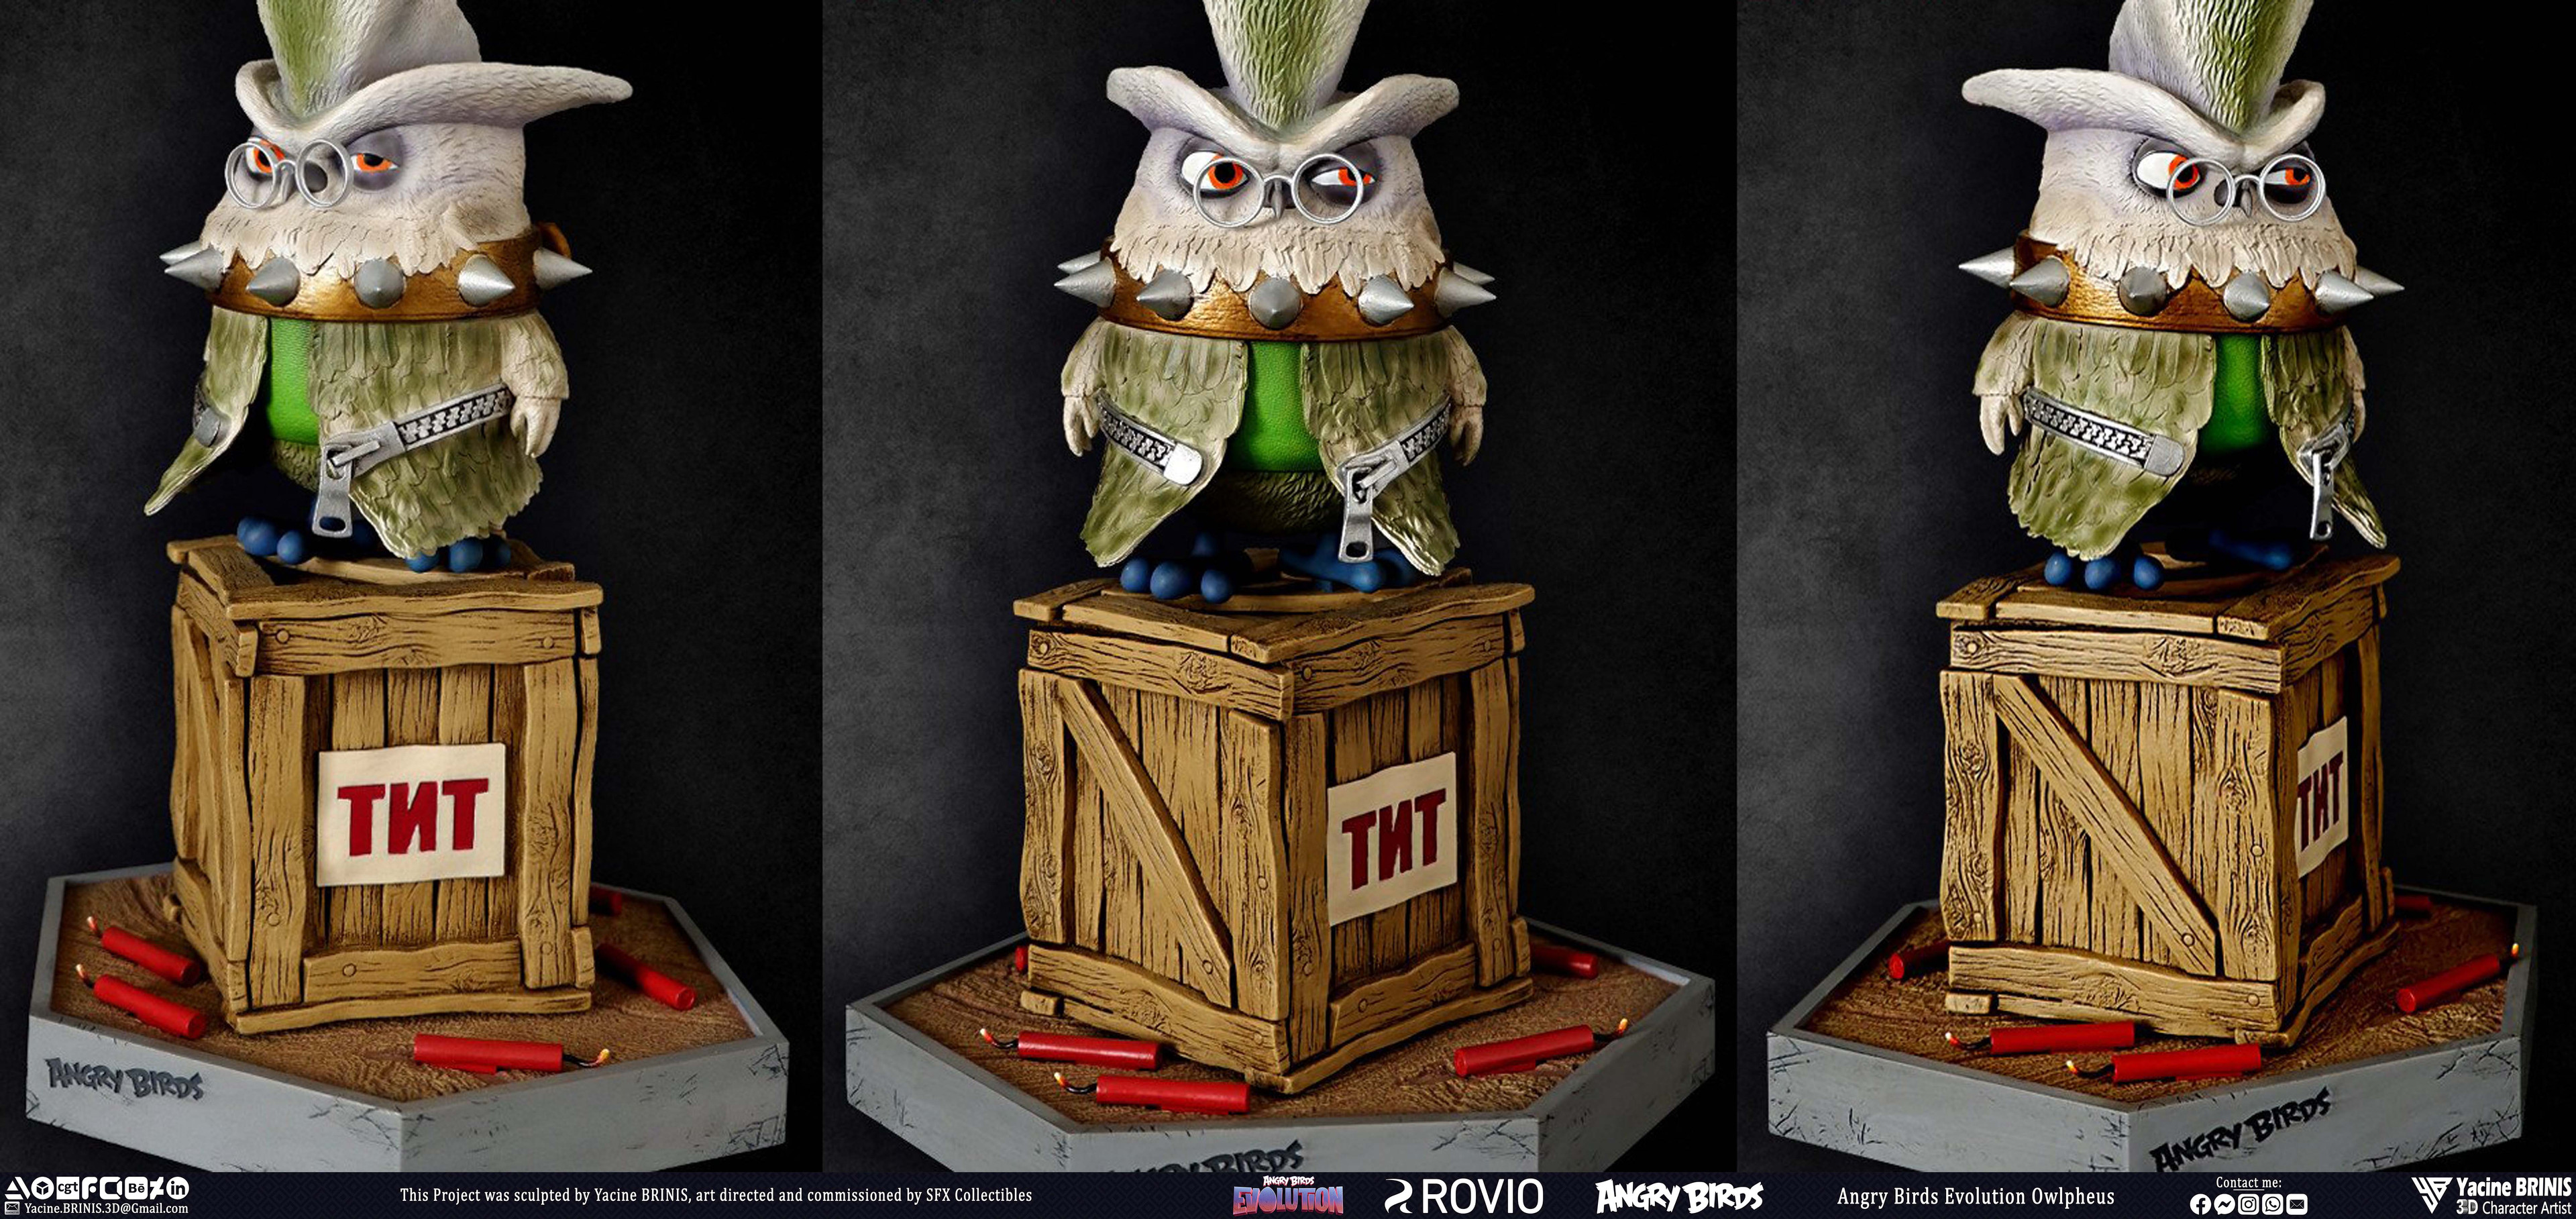 Owlpheus Angry Birds Evolution Rovio Entertainment sculpted by Yacine BRINIS 010 Printed by SFX Collectibles